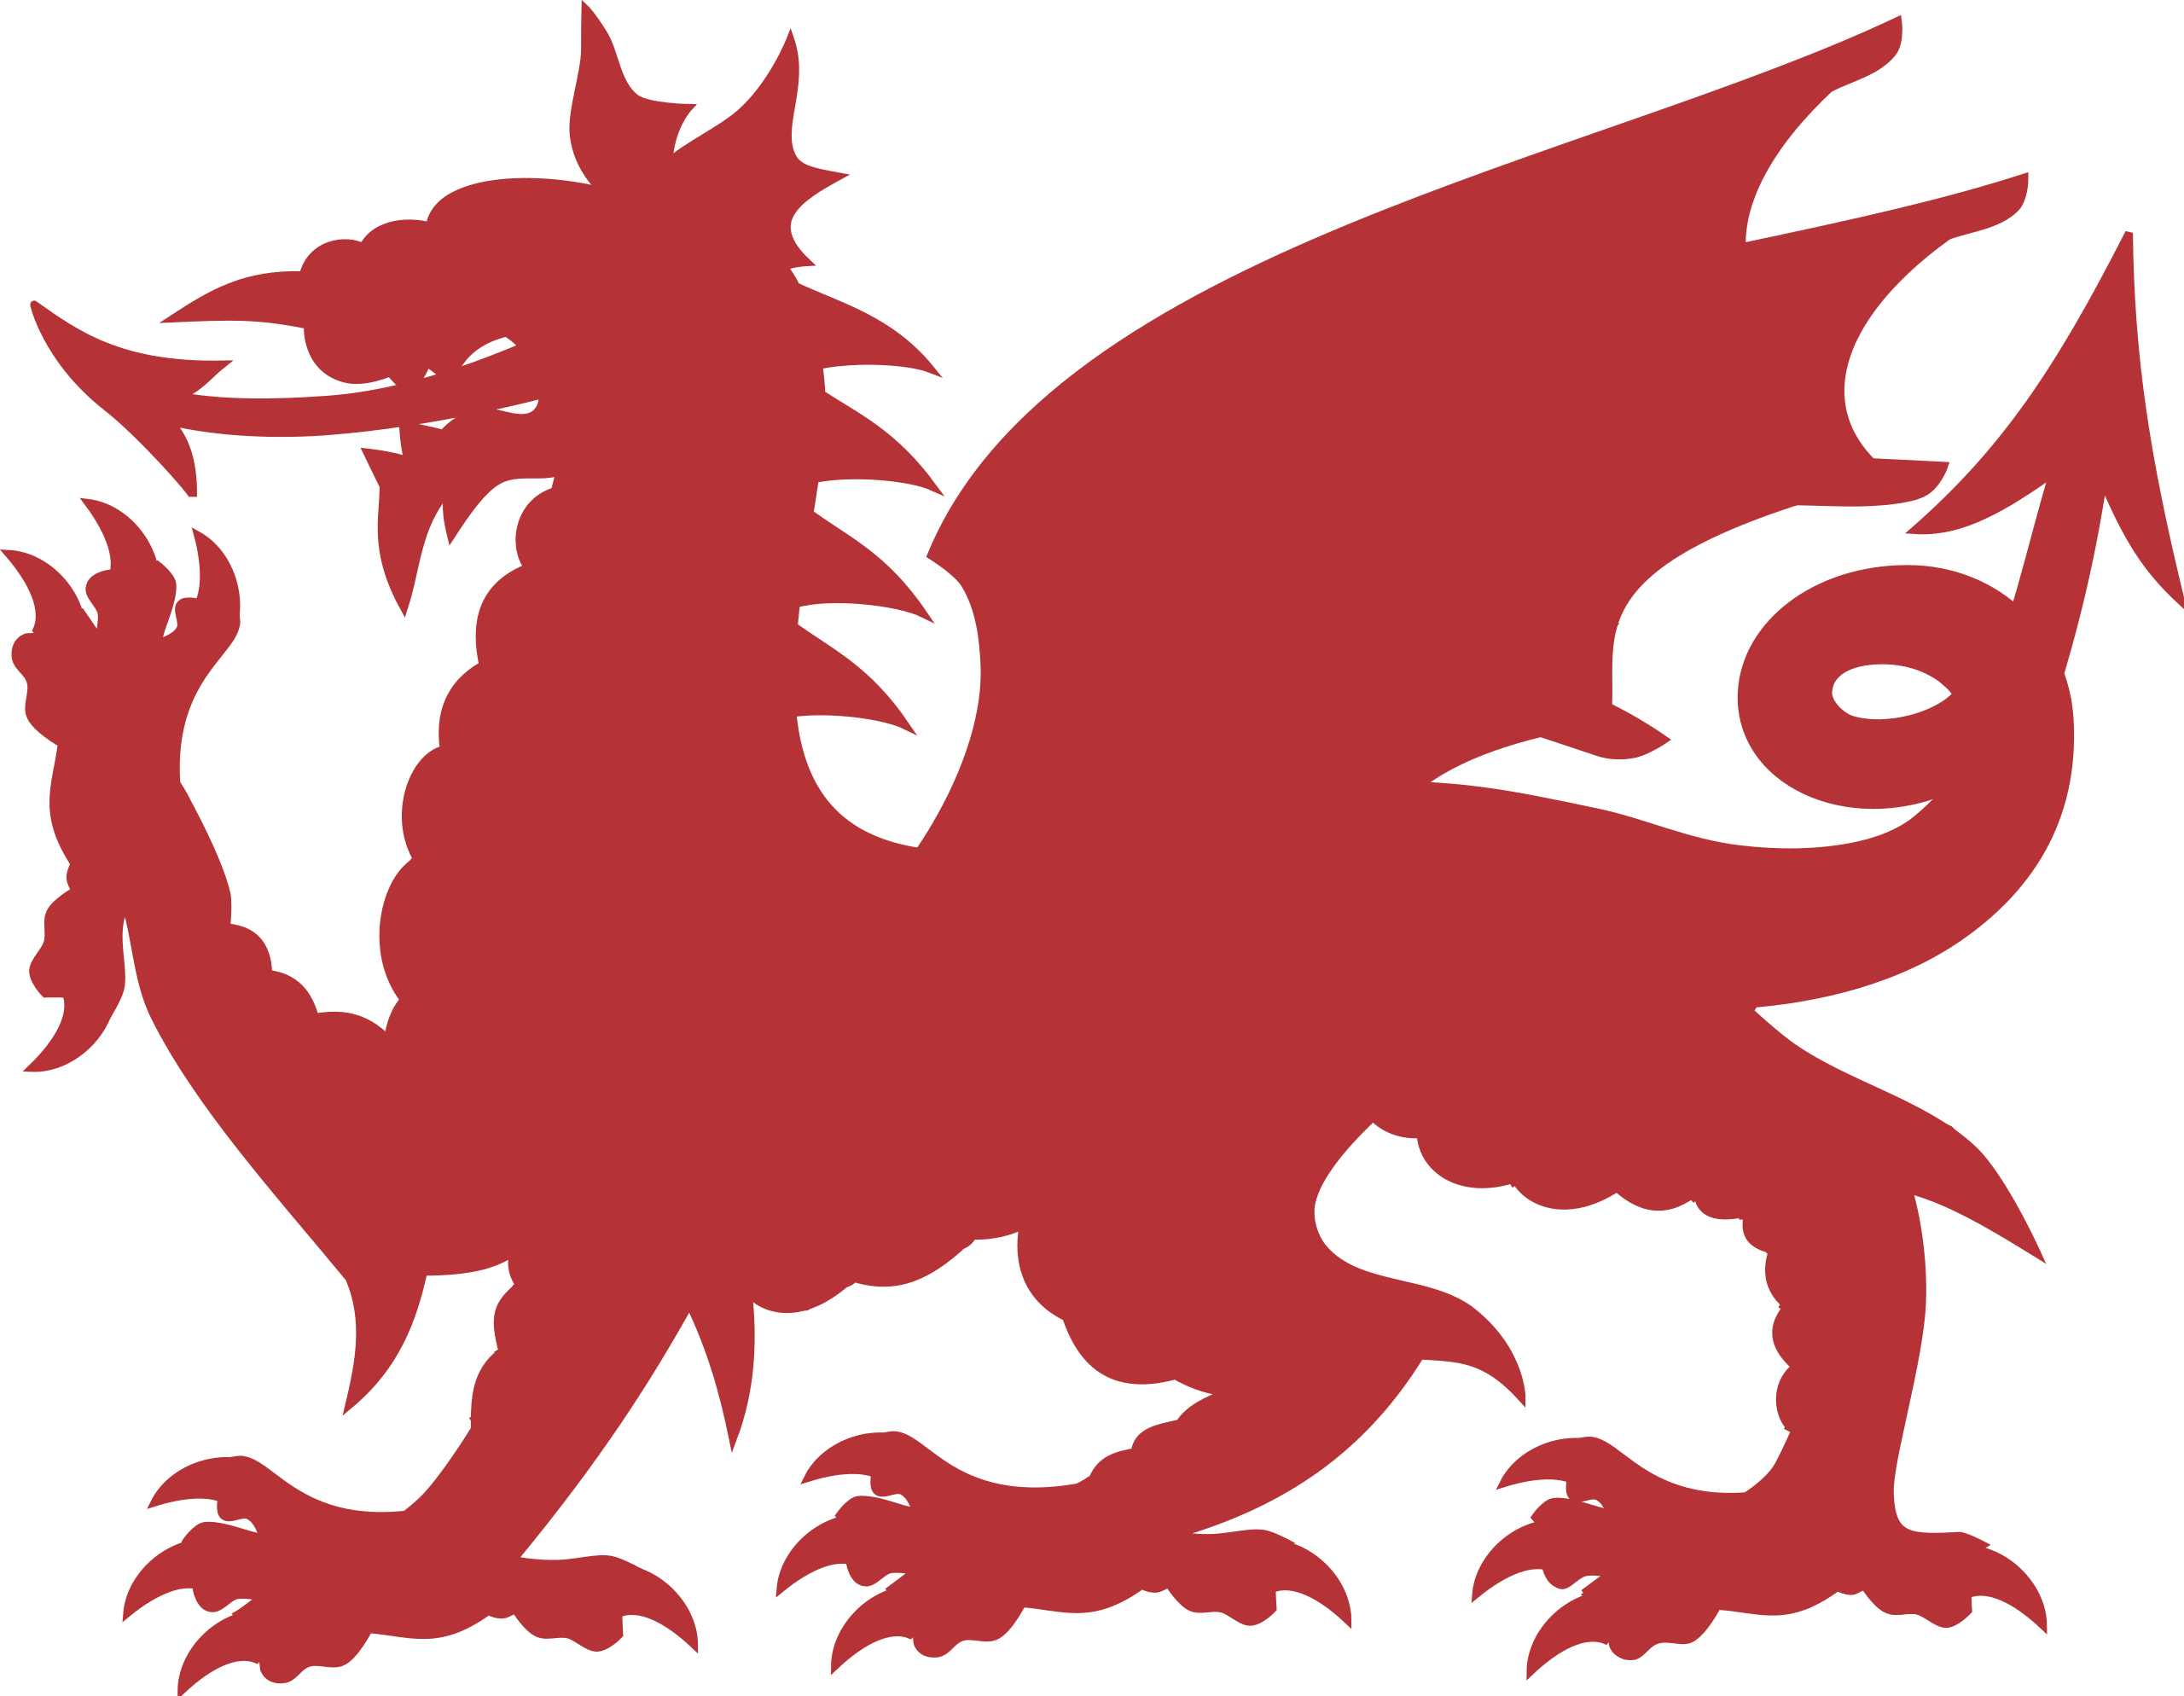 Welsh Dragon Silhouette - Wikimedia Commons